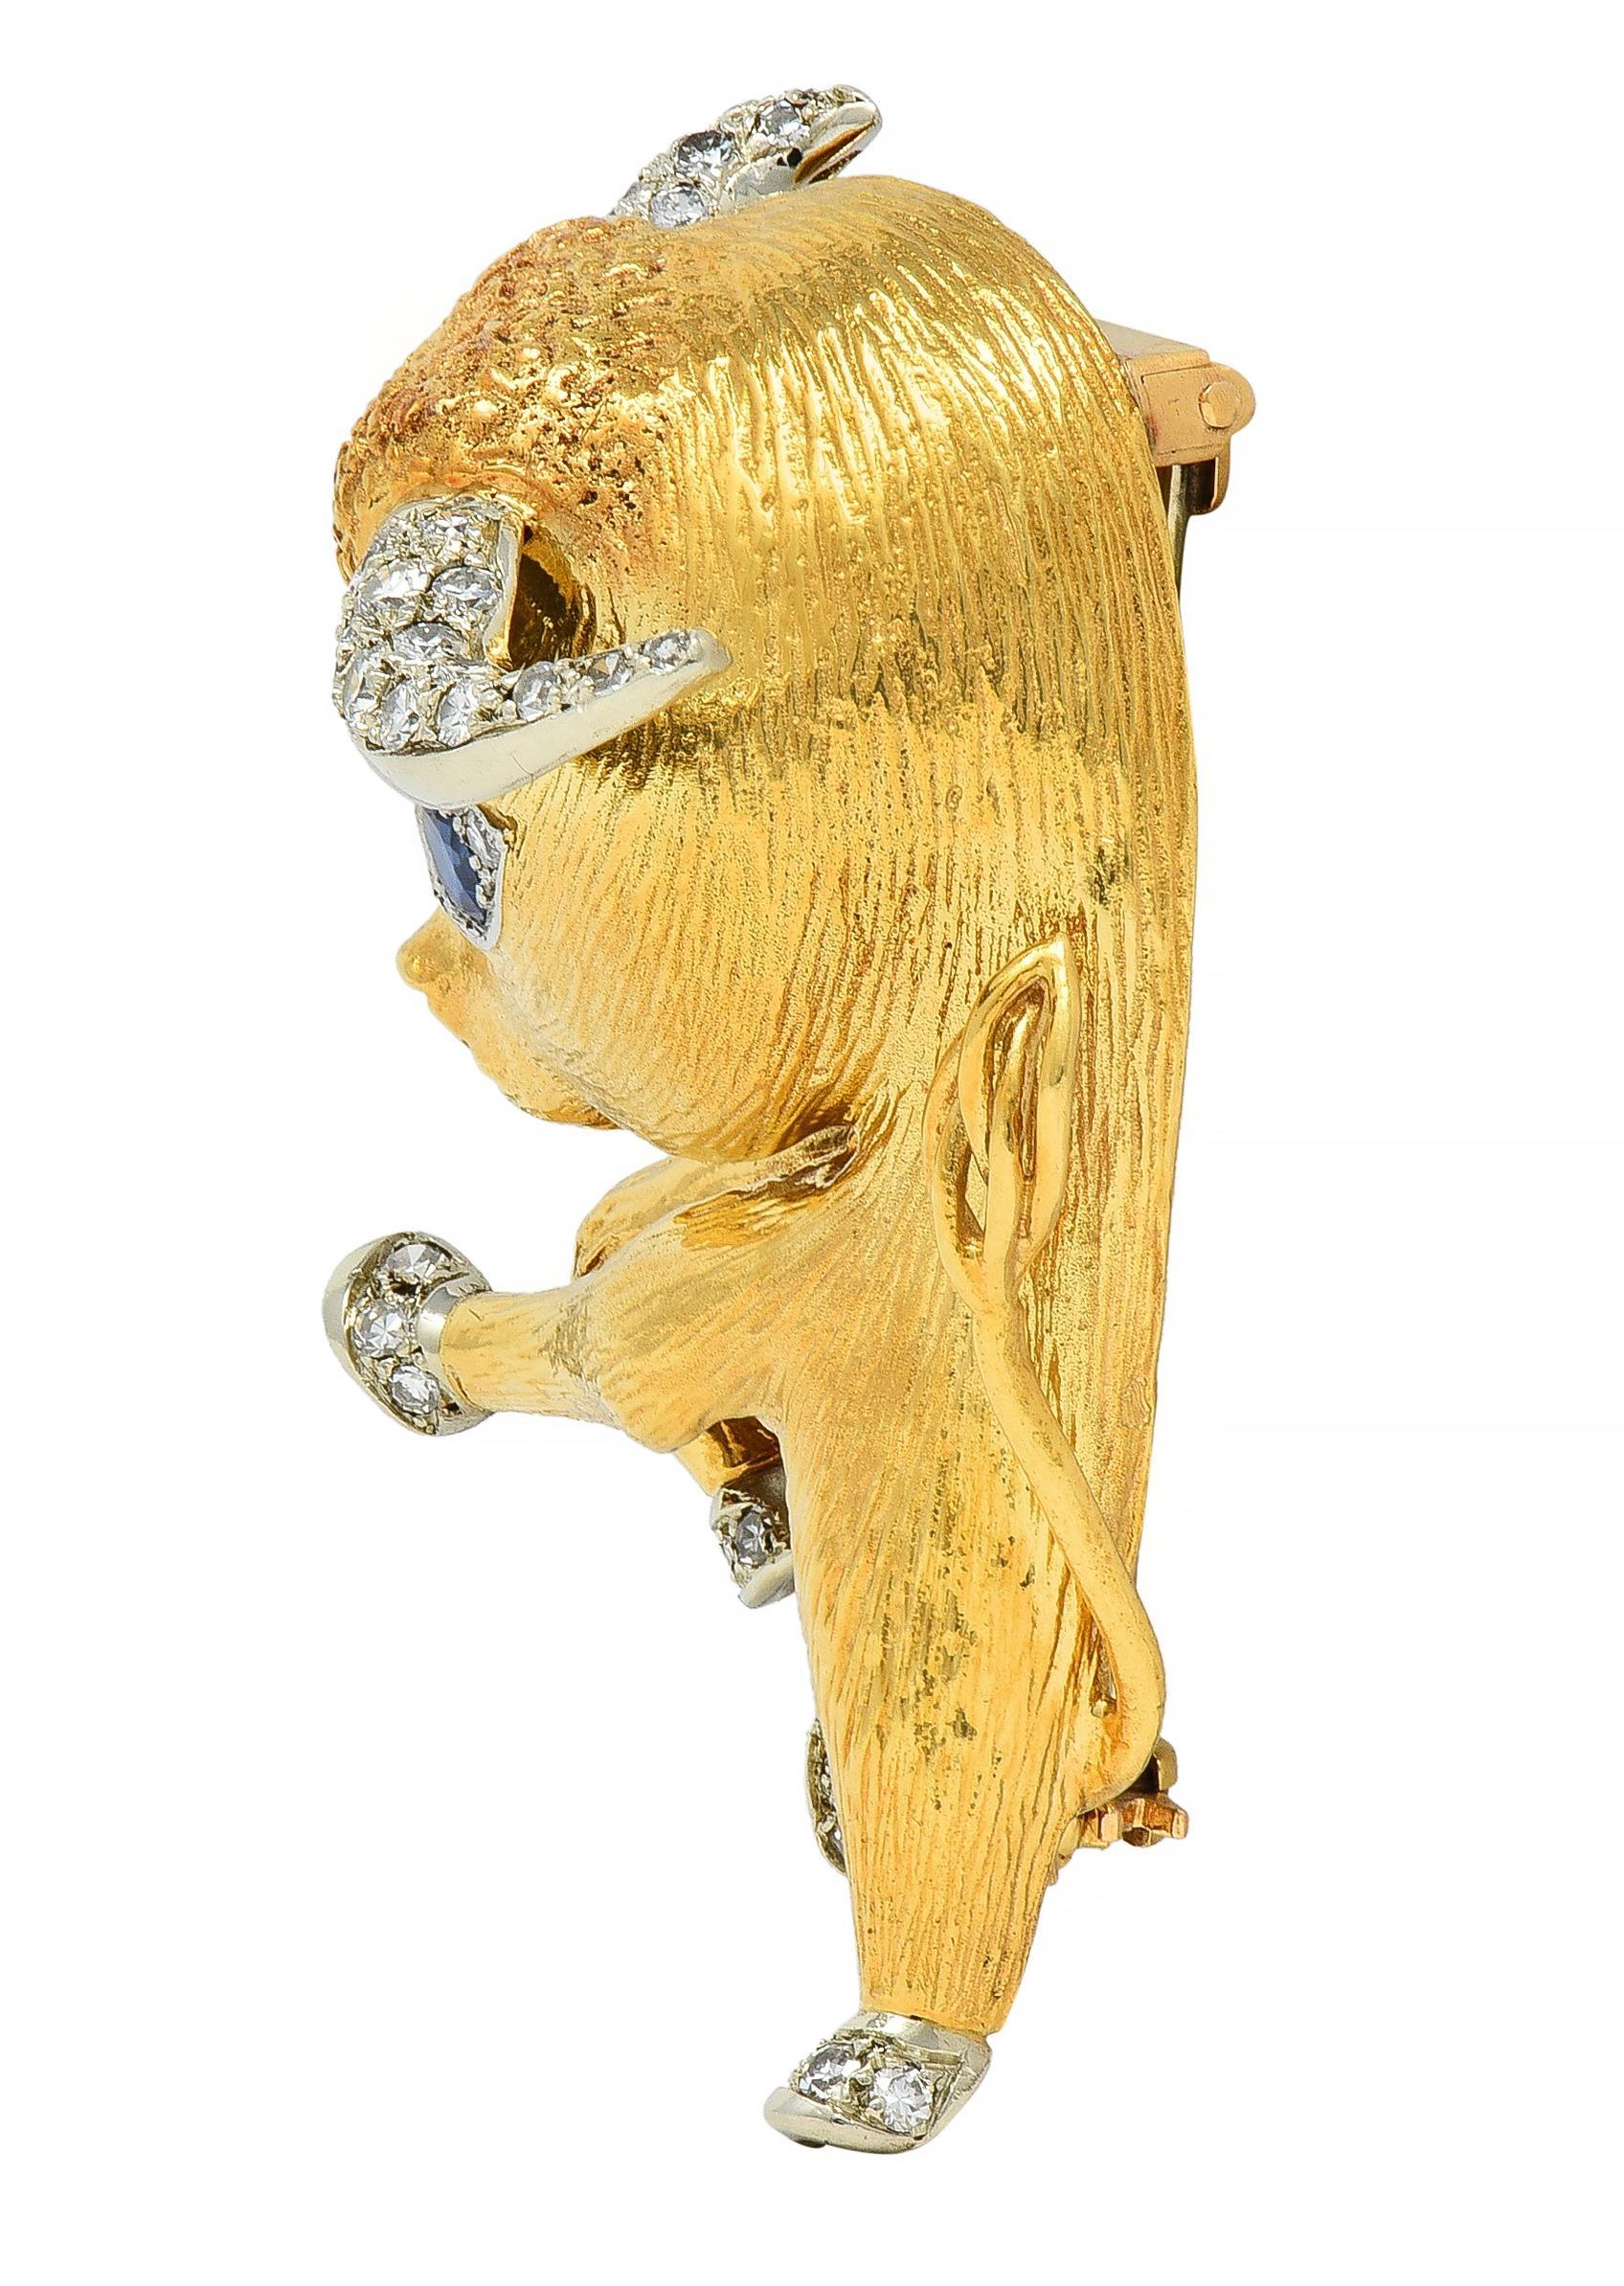 Brooch is designed as a stylized whimsical bull with groove-textured features
Featuring a detailed brushed gold body and high polish gold tail
With platinum ears and hooves - bead set with round brilliant cut diamonds
Weighing approximately 0.84